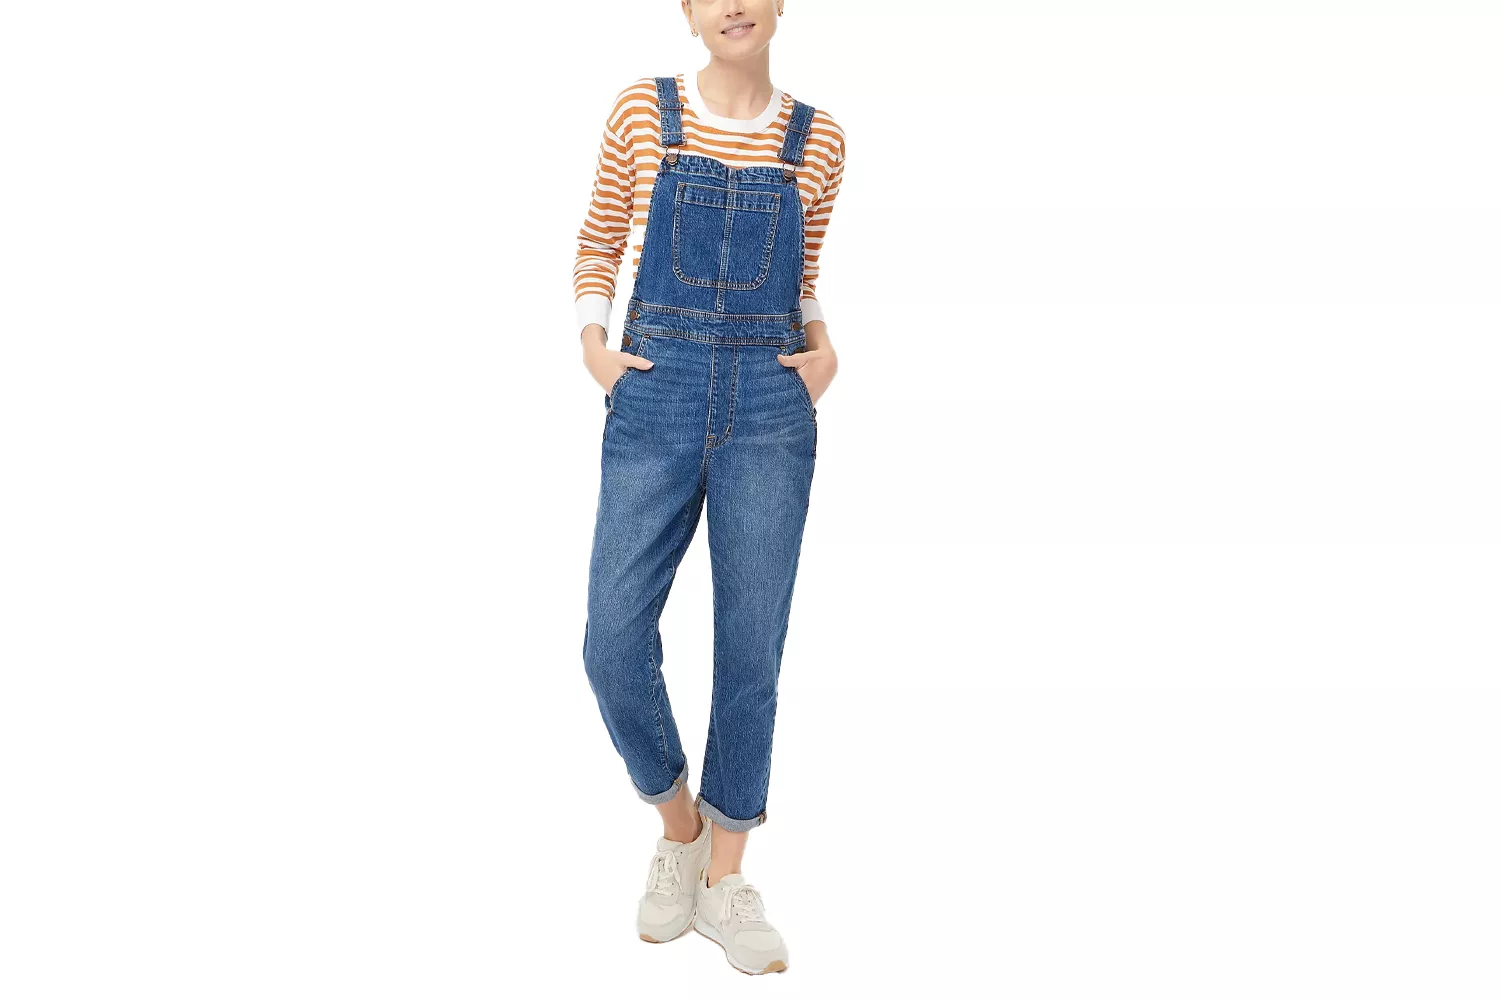 J.Crew Classic Overalls in All-Day Stretch